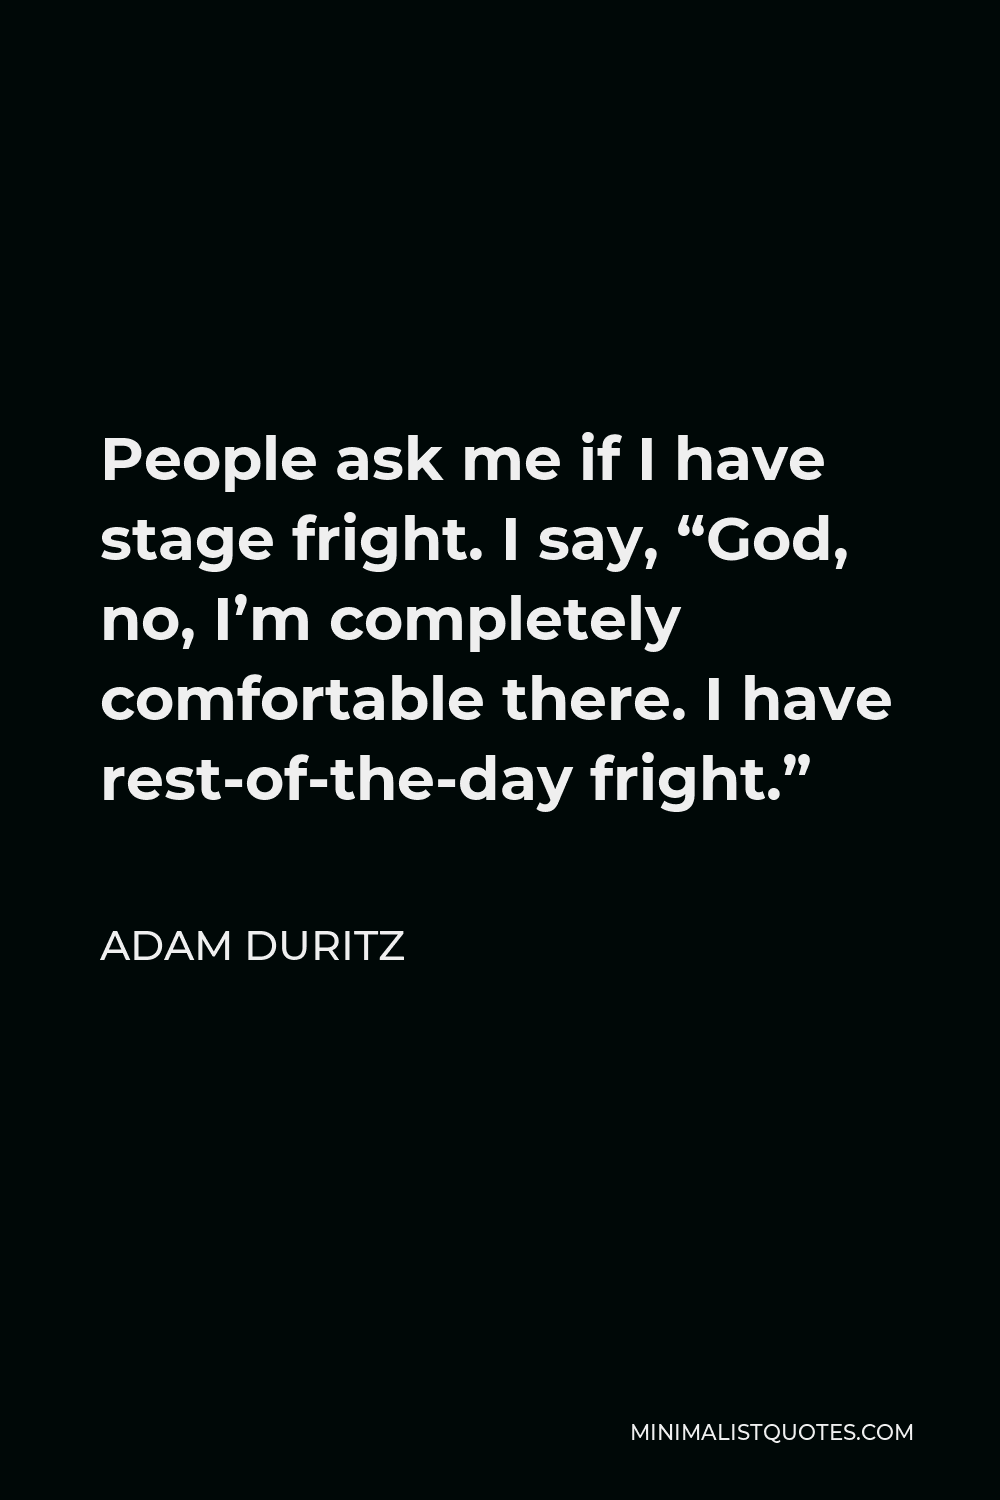 Adam Duritz Quote - People ask me if I have stage fright. I say, “God, no, I’m completely comfortable there. I have rest-of-the-day fright.”